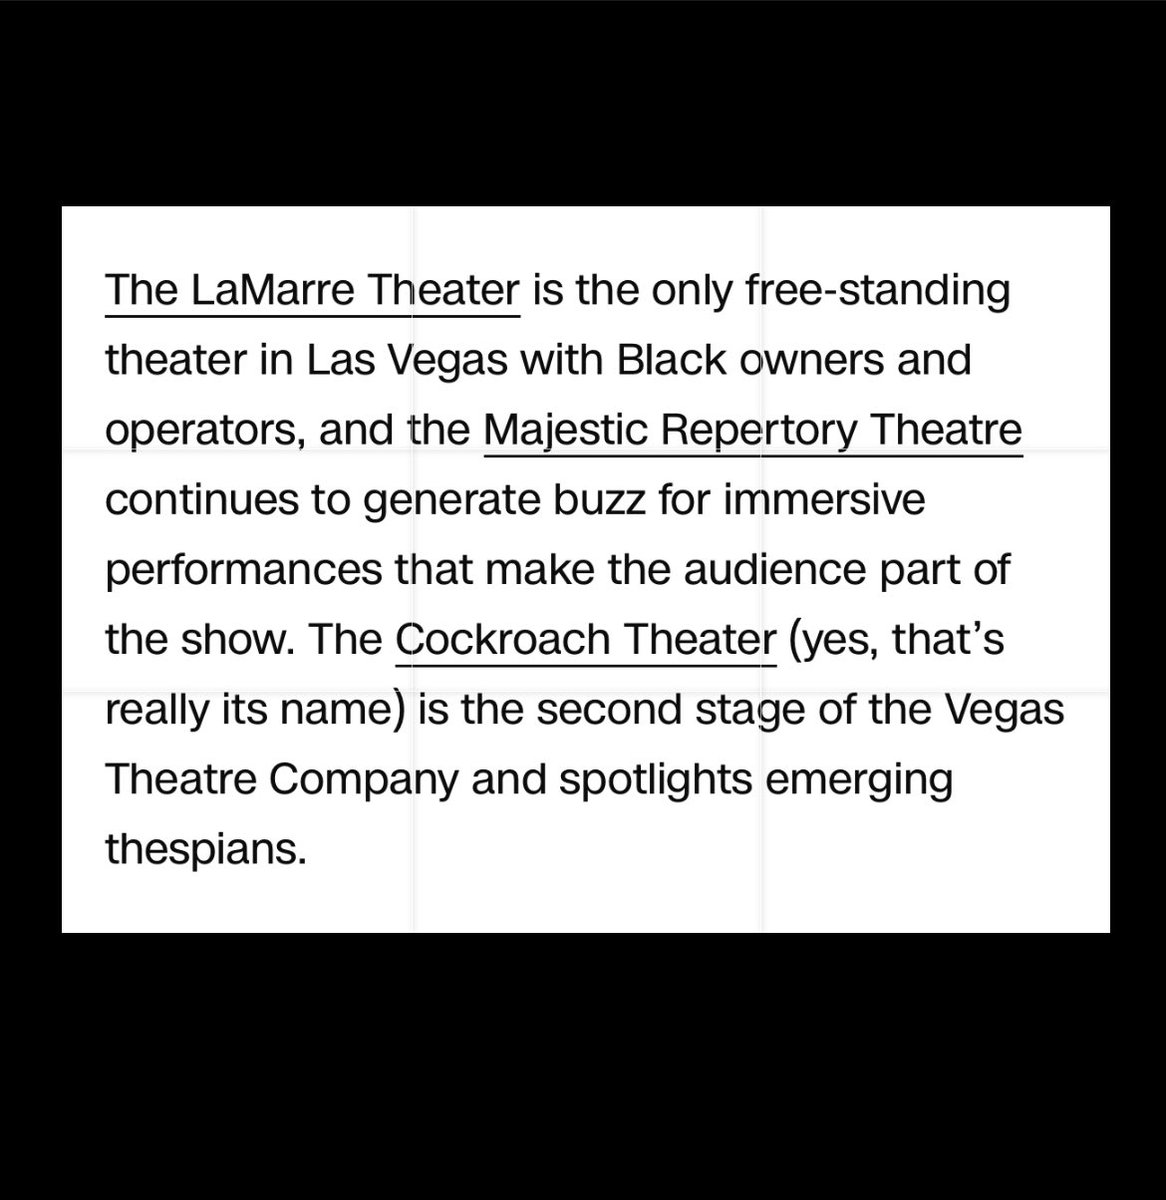 Hey, thanks for the shout out @cnn - we've been a proud fixture of the Downtown Arts District since 2016!

#majesticaf #immersivetheatre #immersiveexperience   #theatre #livetheatre #dtlv #downtown #lasvegas #vegas  #musicaltheatre #theatrenerds #majesticrepertorytheatre  #cnn